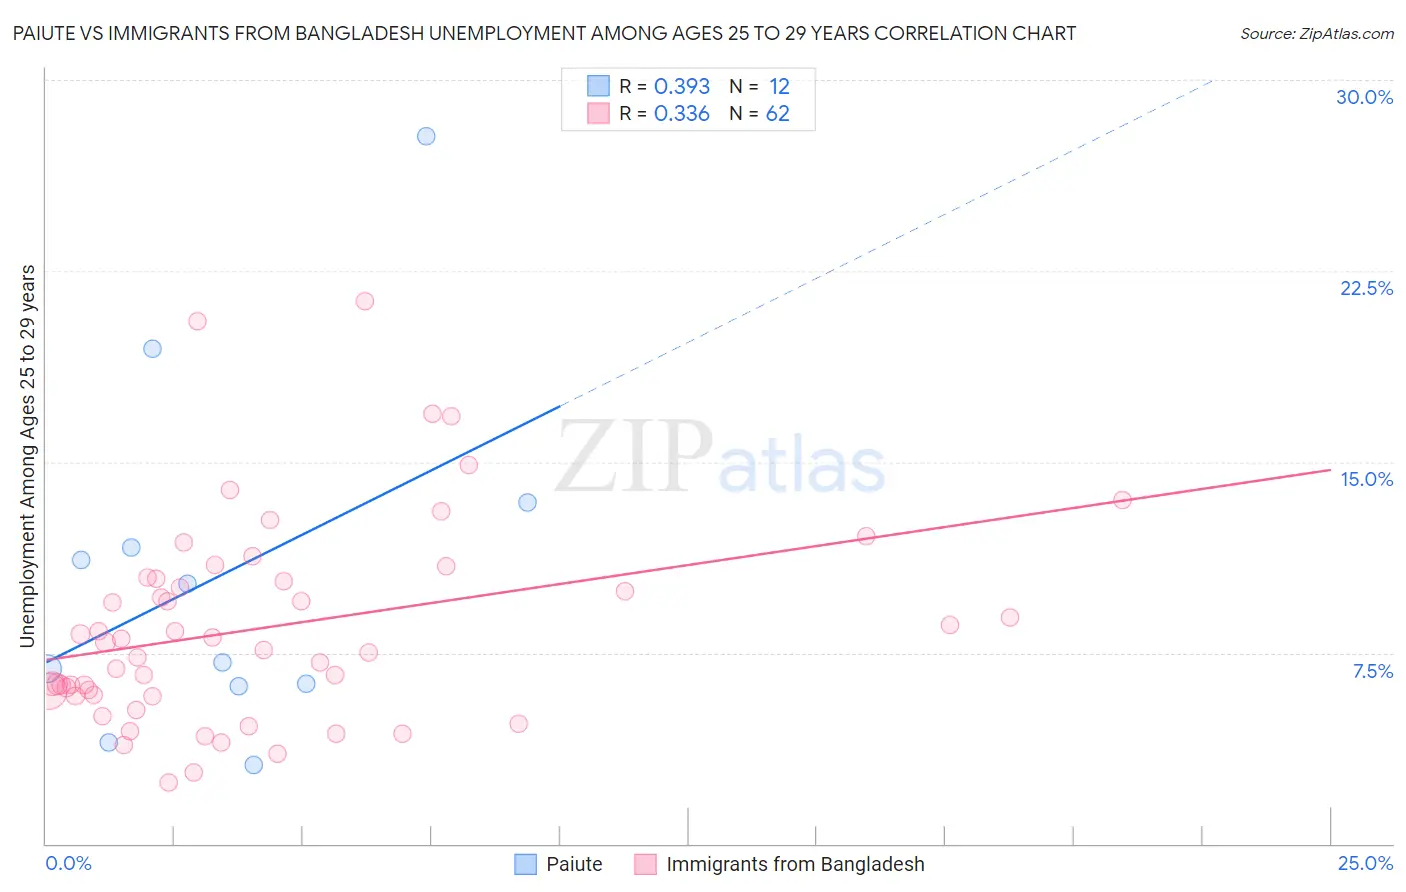 Paiute vs Immigrants from Bangladesh Unemployment Among Ages 25 to 29 years